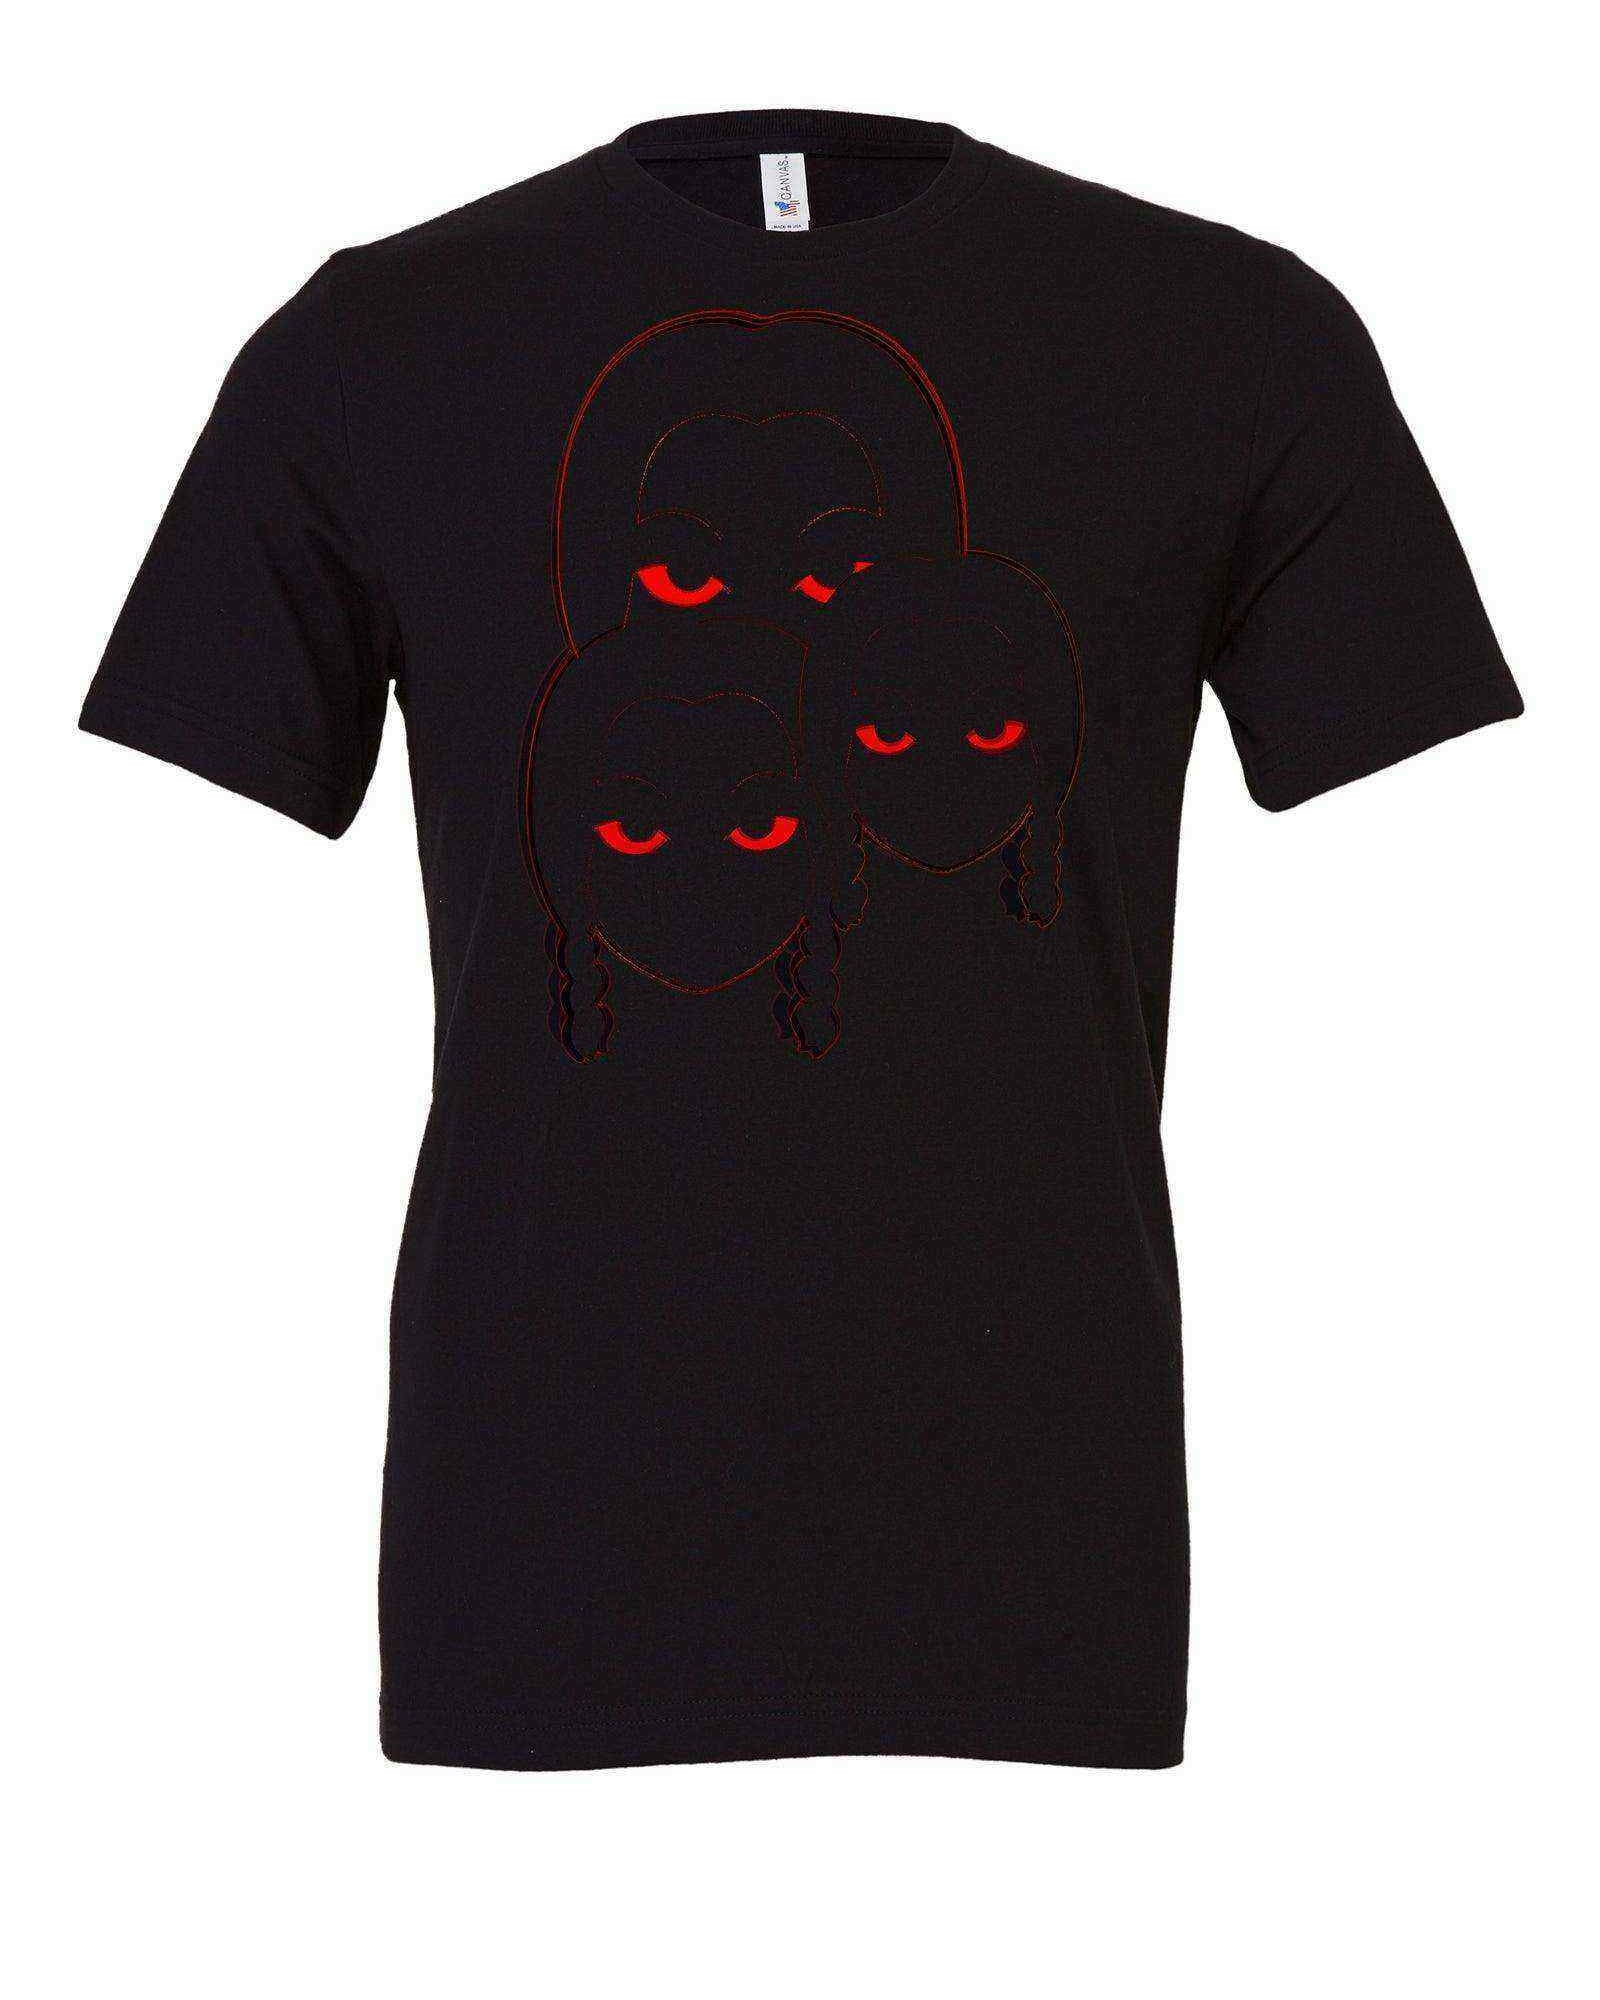 Youth | Creepy Wednesday Shirt | The Addams Shirt | Red Wednesday - Dylan's Tees